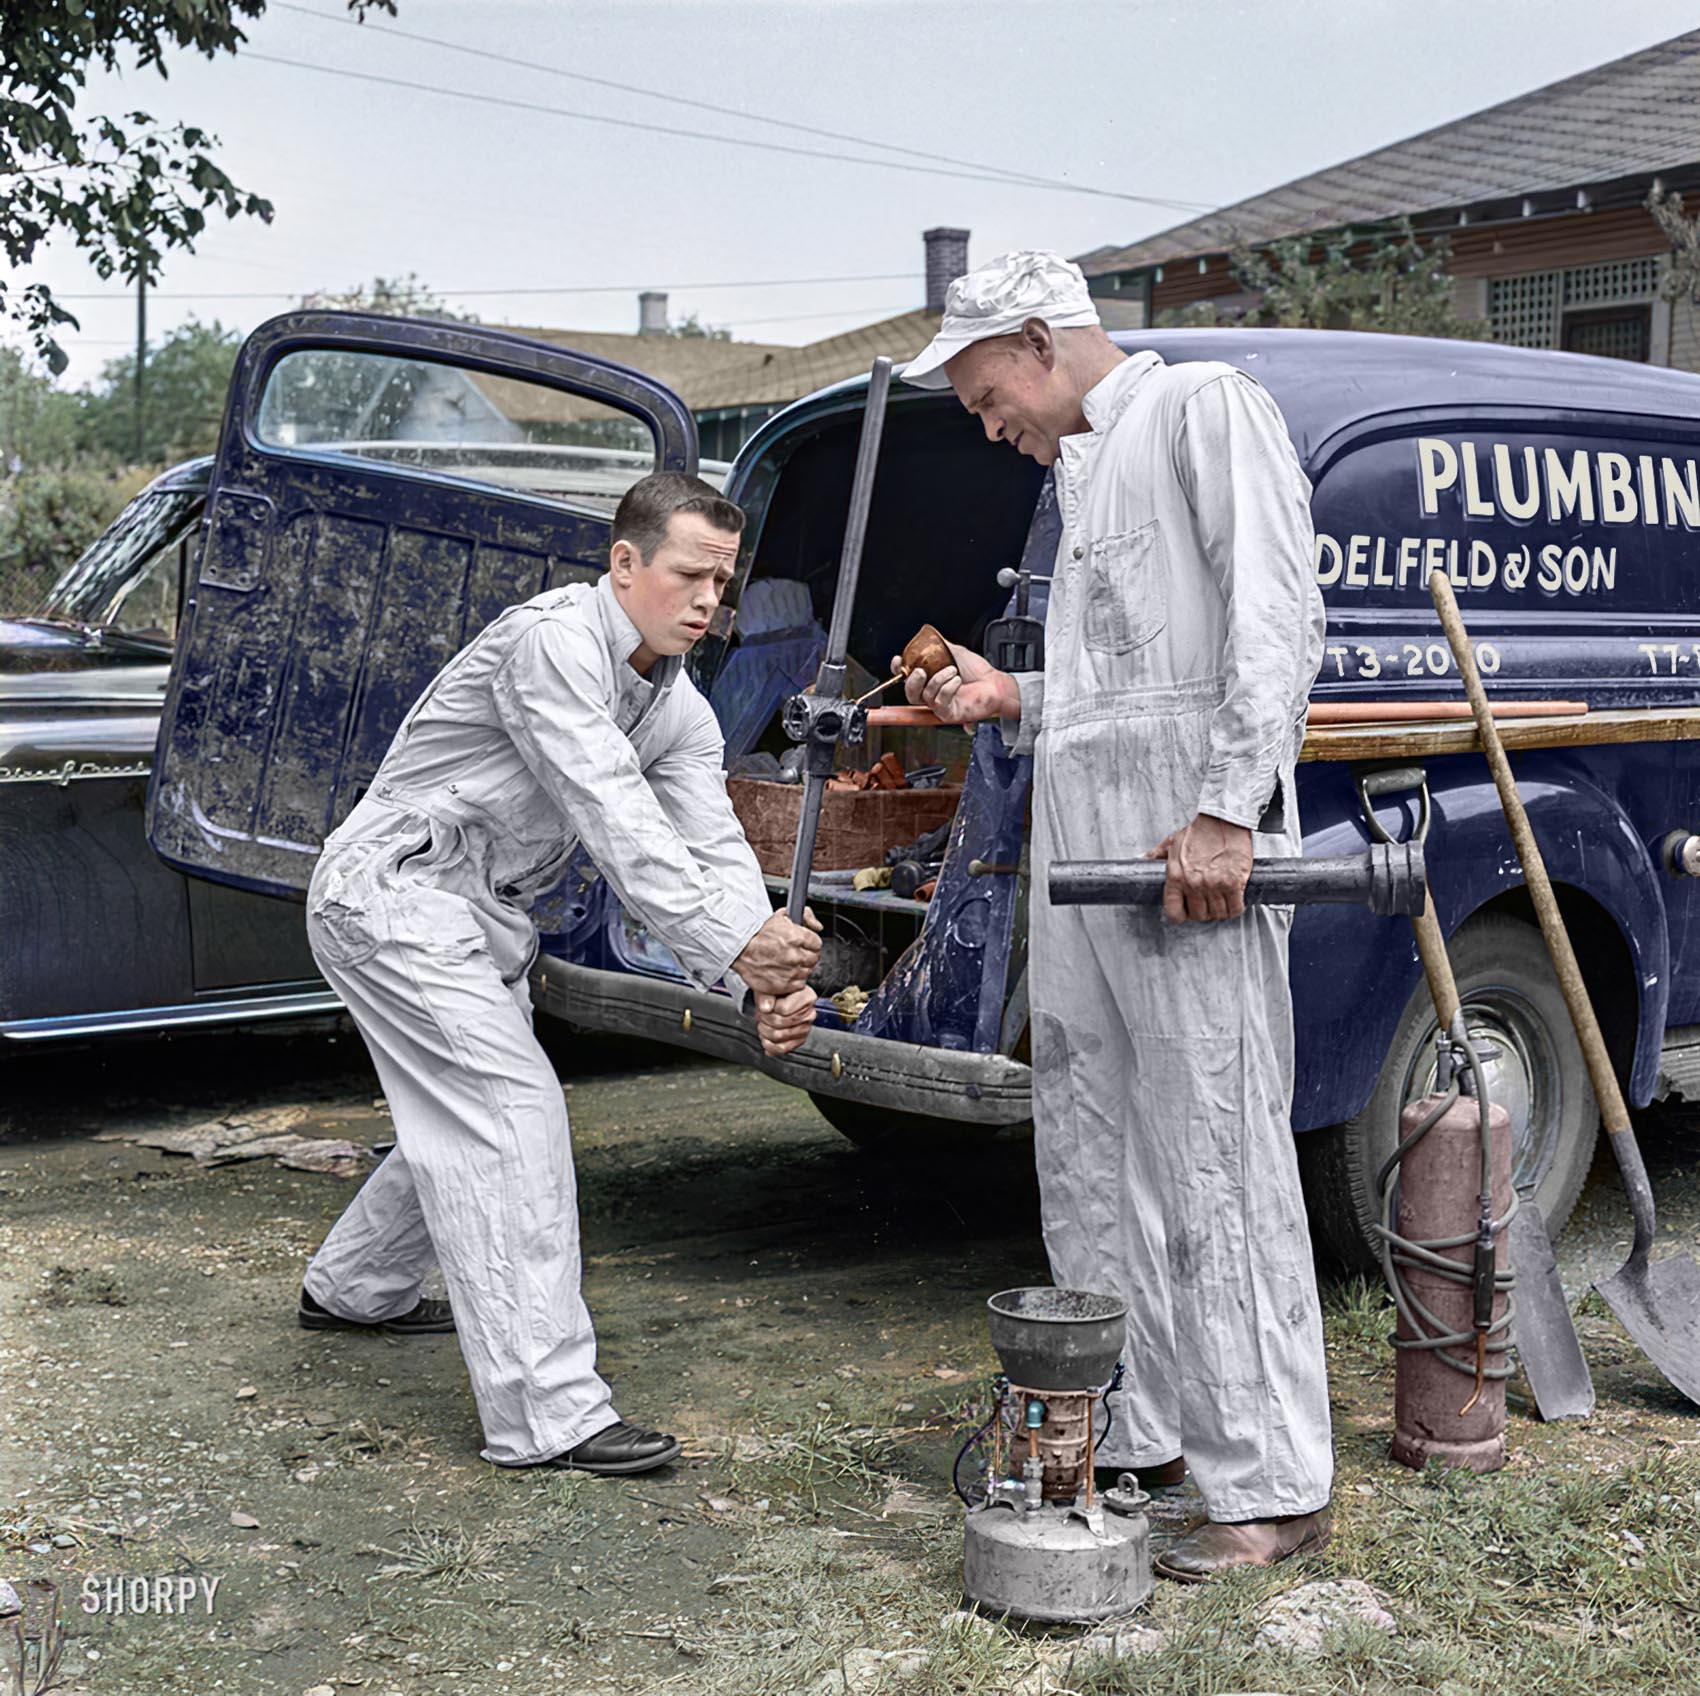 Paul helping father at plumbing business.

Colorized version of this Shorpy old photo.
View full size.

